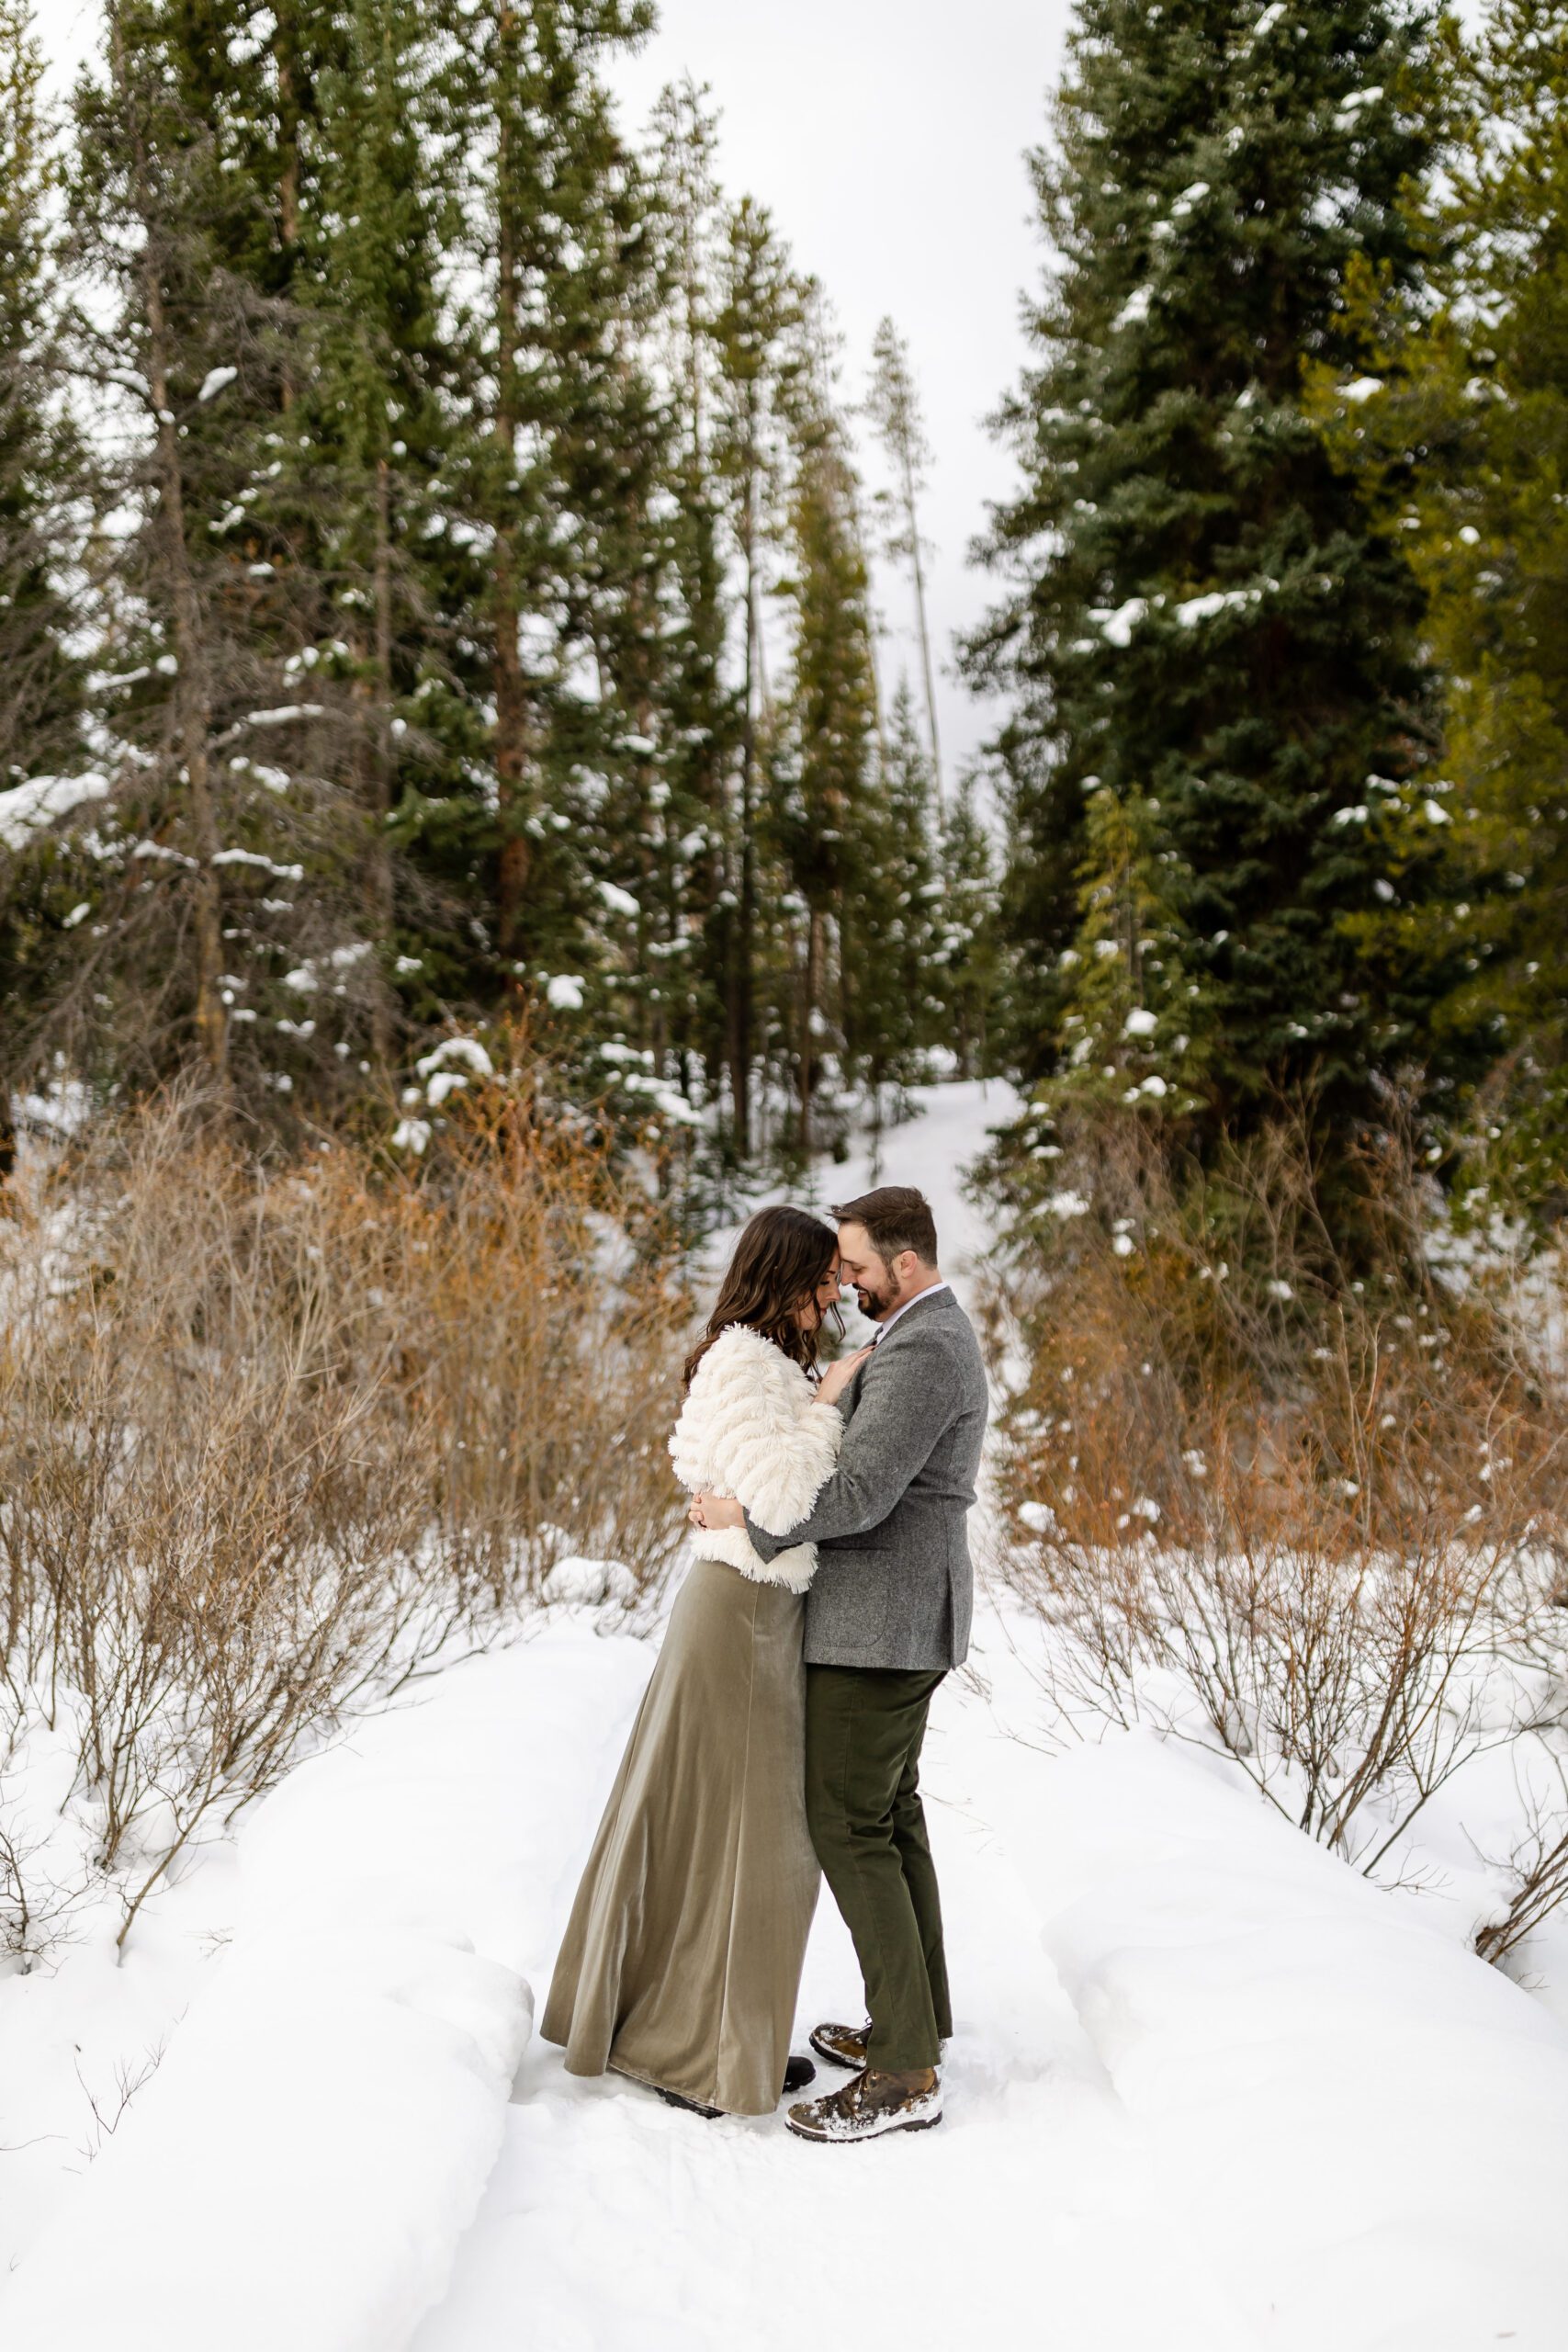 the bride and groom smiling cuddling in the snow at their Winter Park elopement.